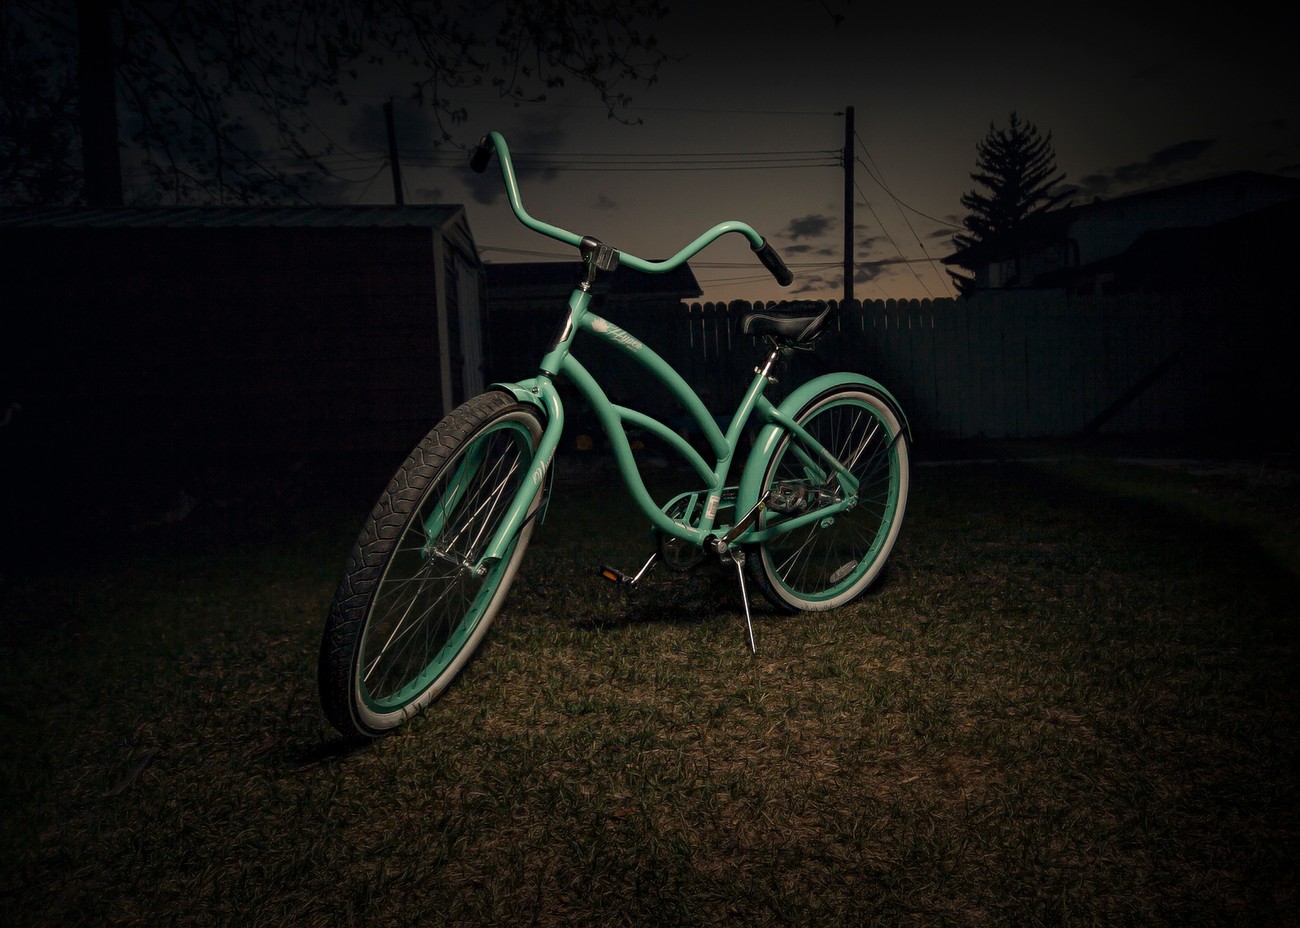 31+ Original Shots Of Bicycles That Will Make You Want To Go For A Ride